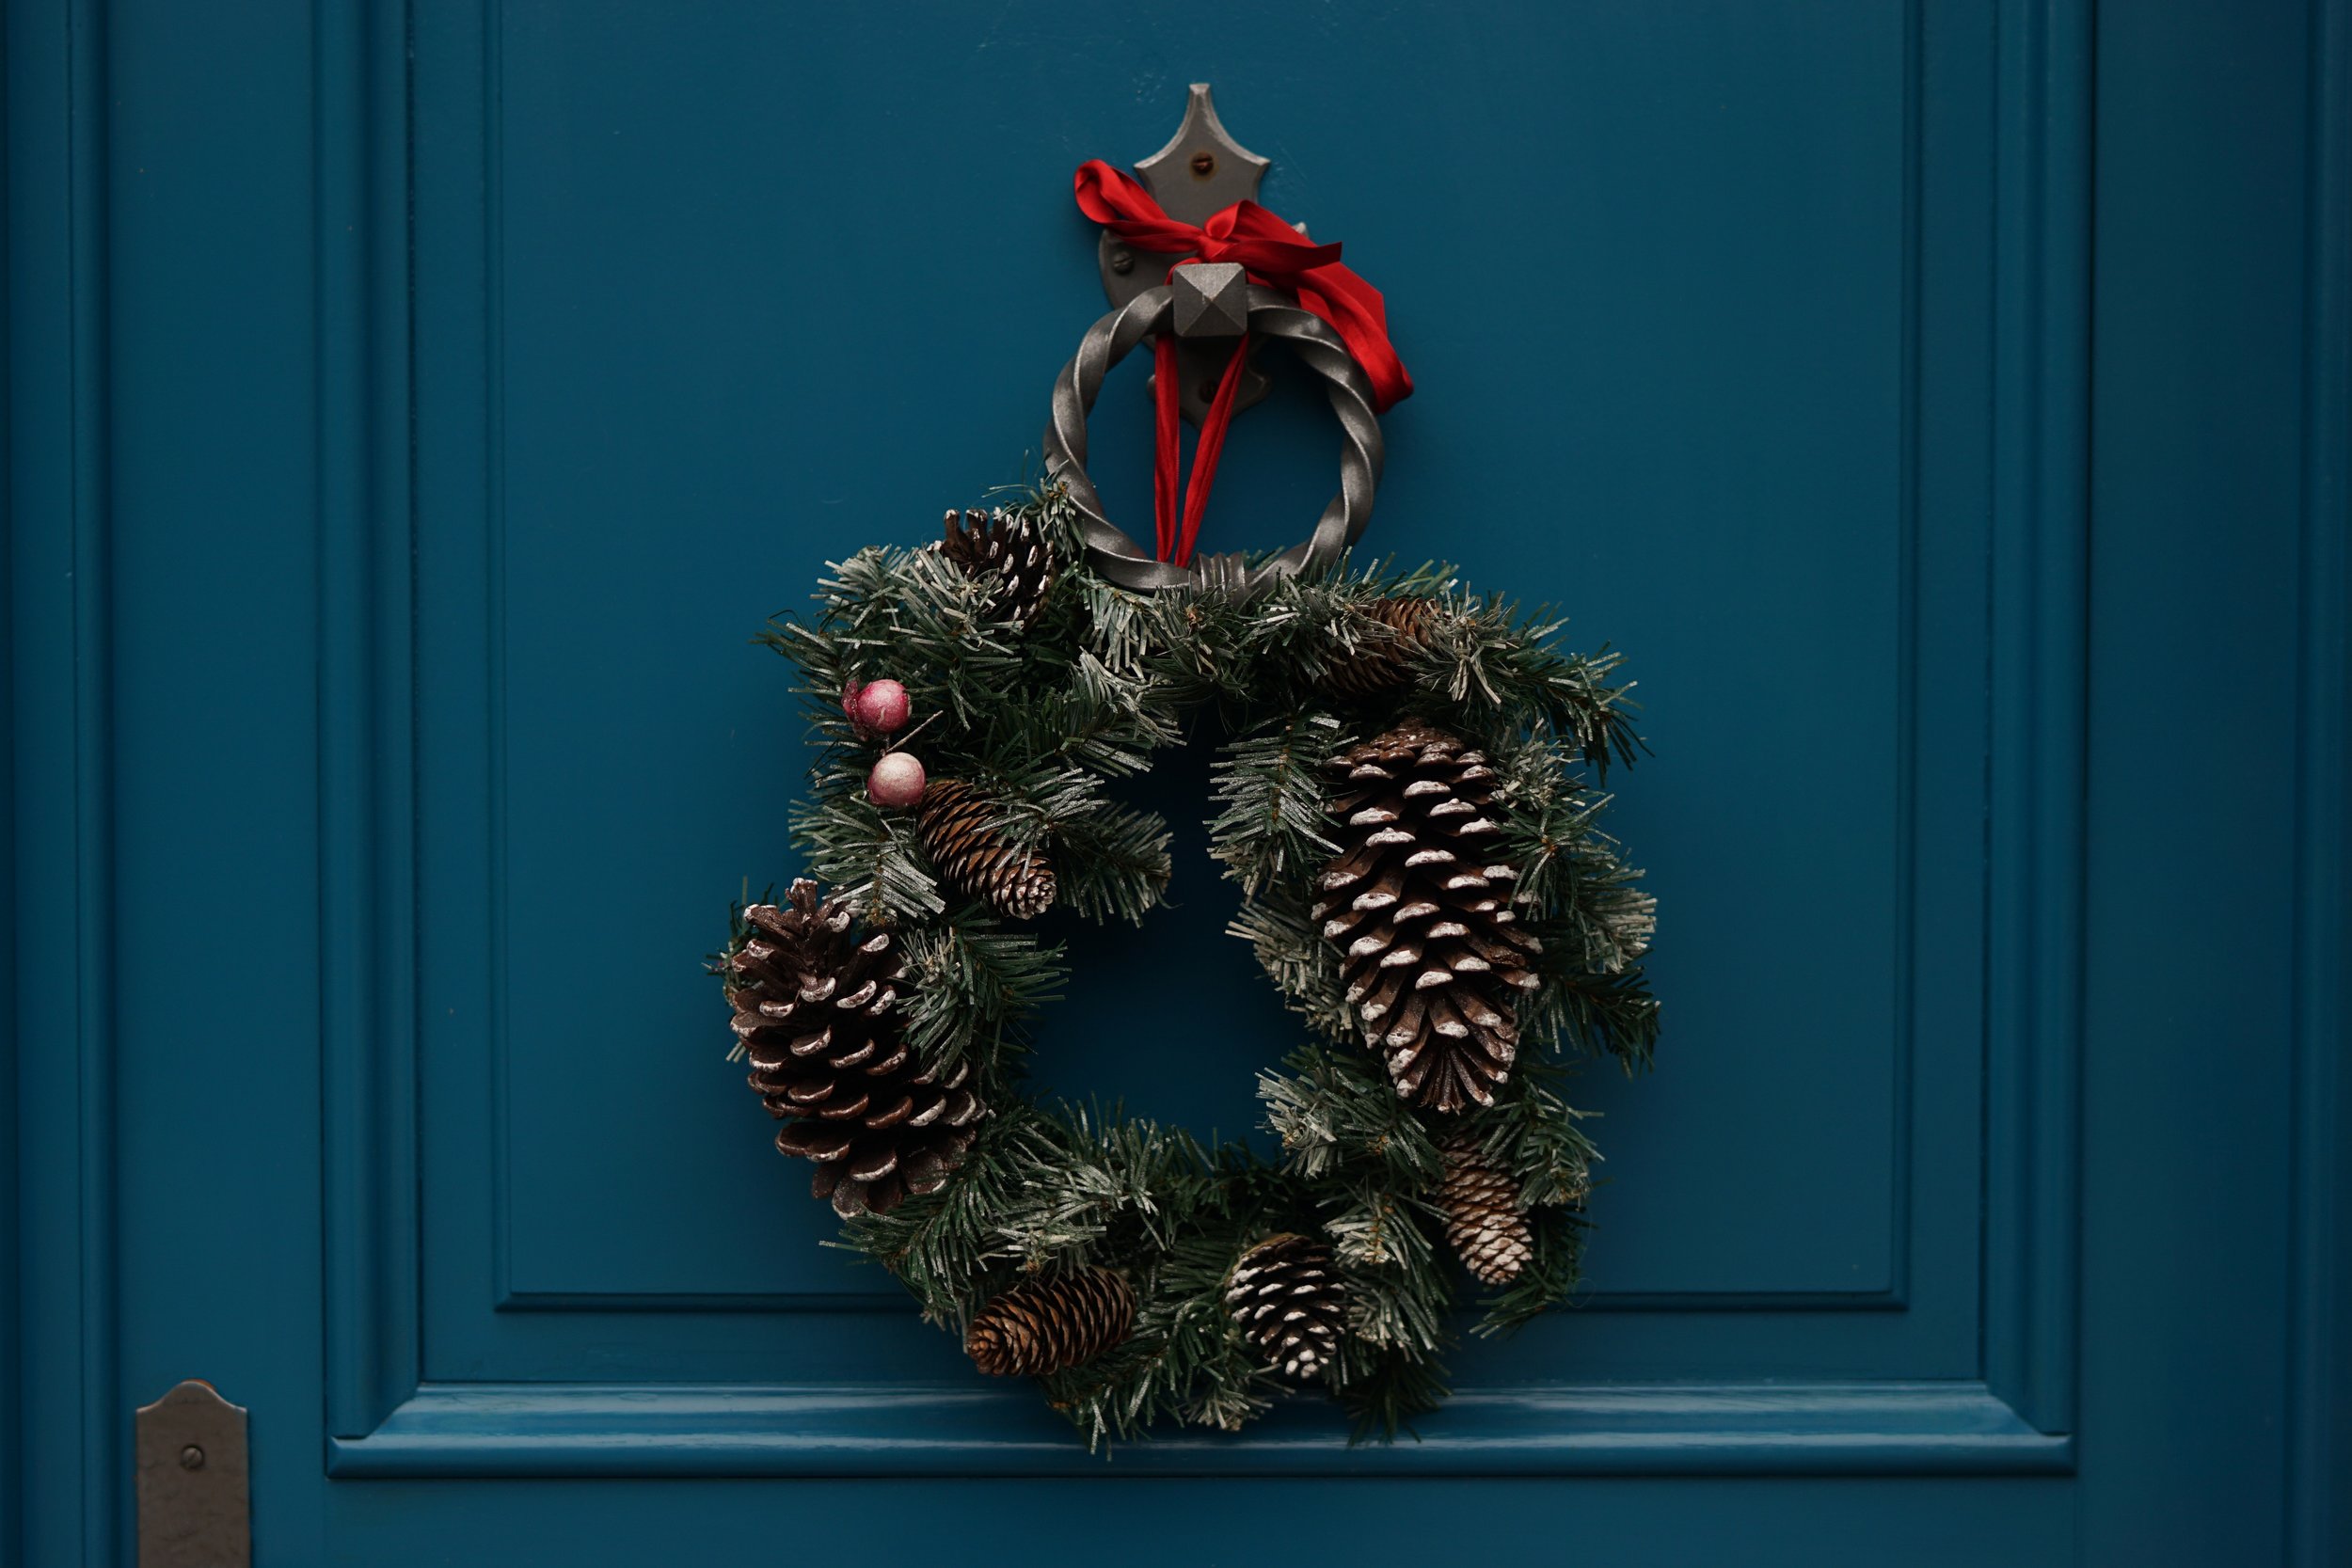 Insiders Guide To Holiday Entertaining image asset